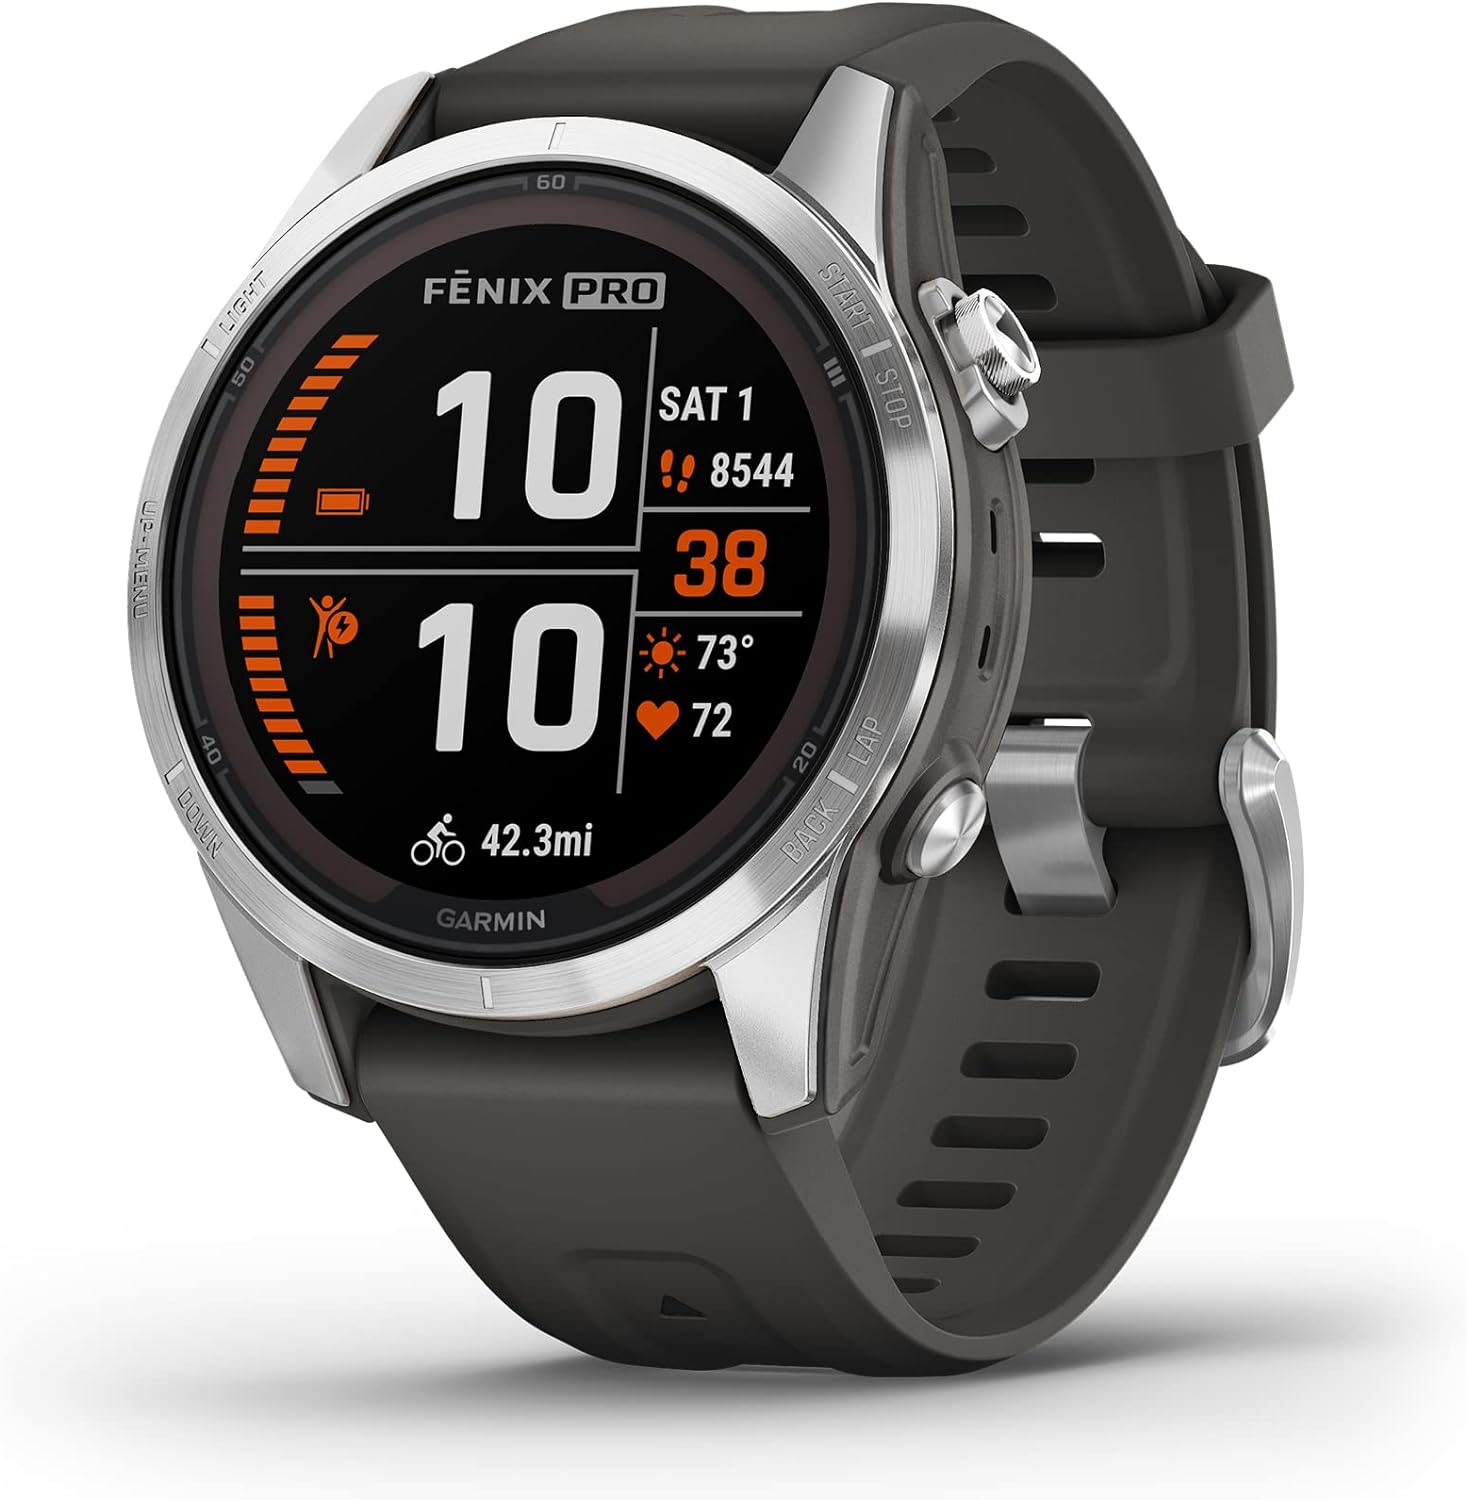 Garmin Fenix 7 Pro review: This top outdoor watch gets the Pro